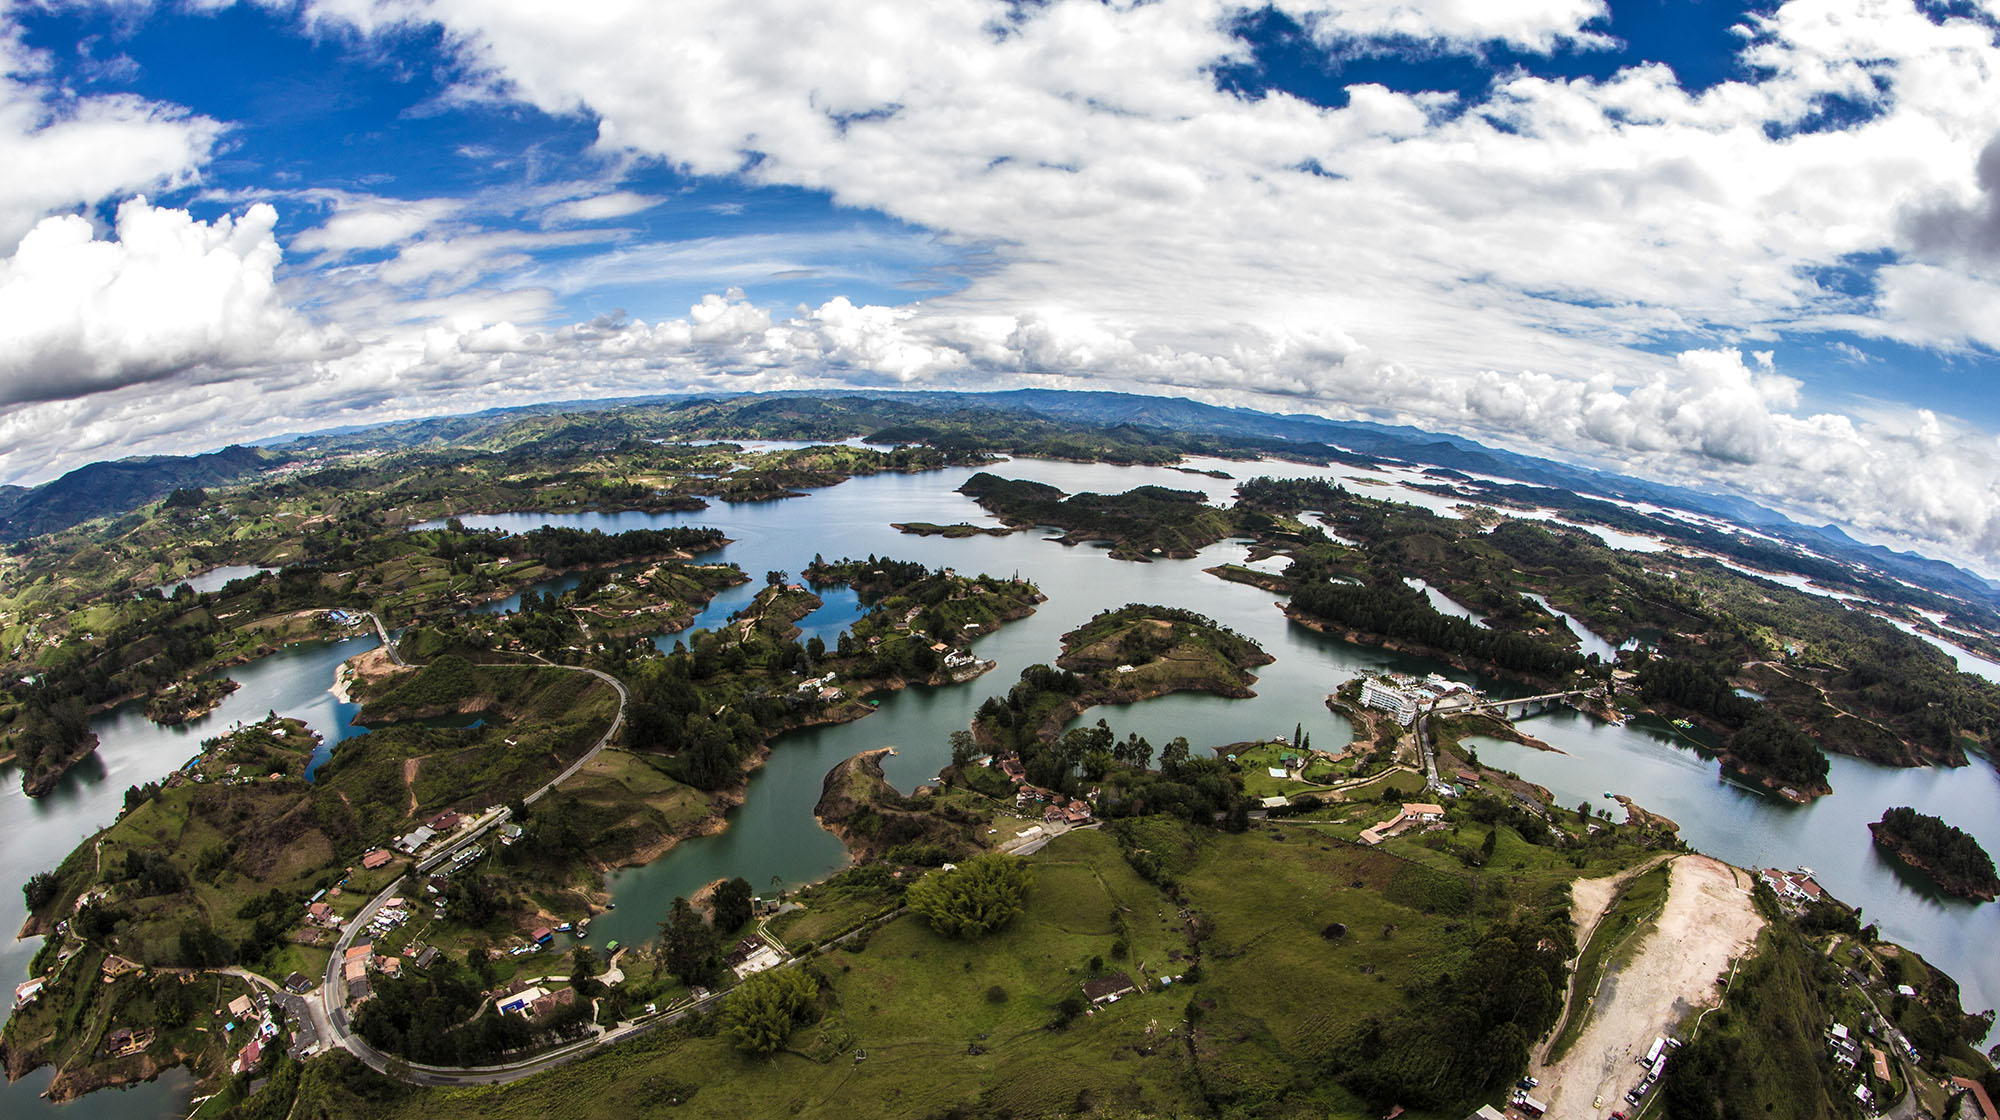 Lakes and islands dot a panoramic photo of Guatapé, Antioquia, Colombia. (Photo by Federico Carranza.)